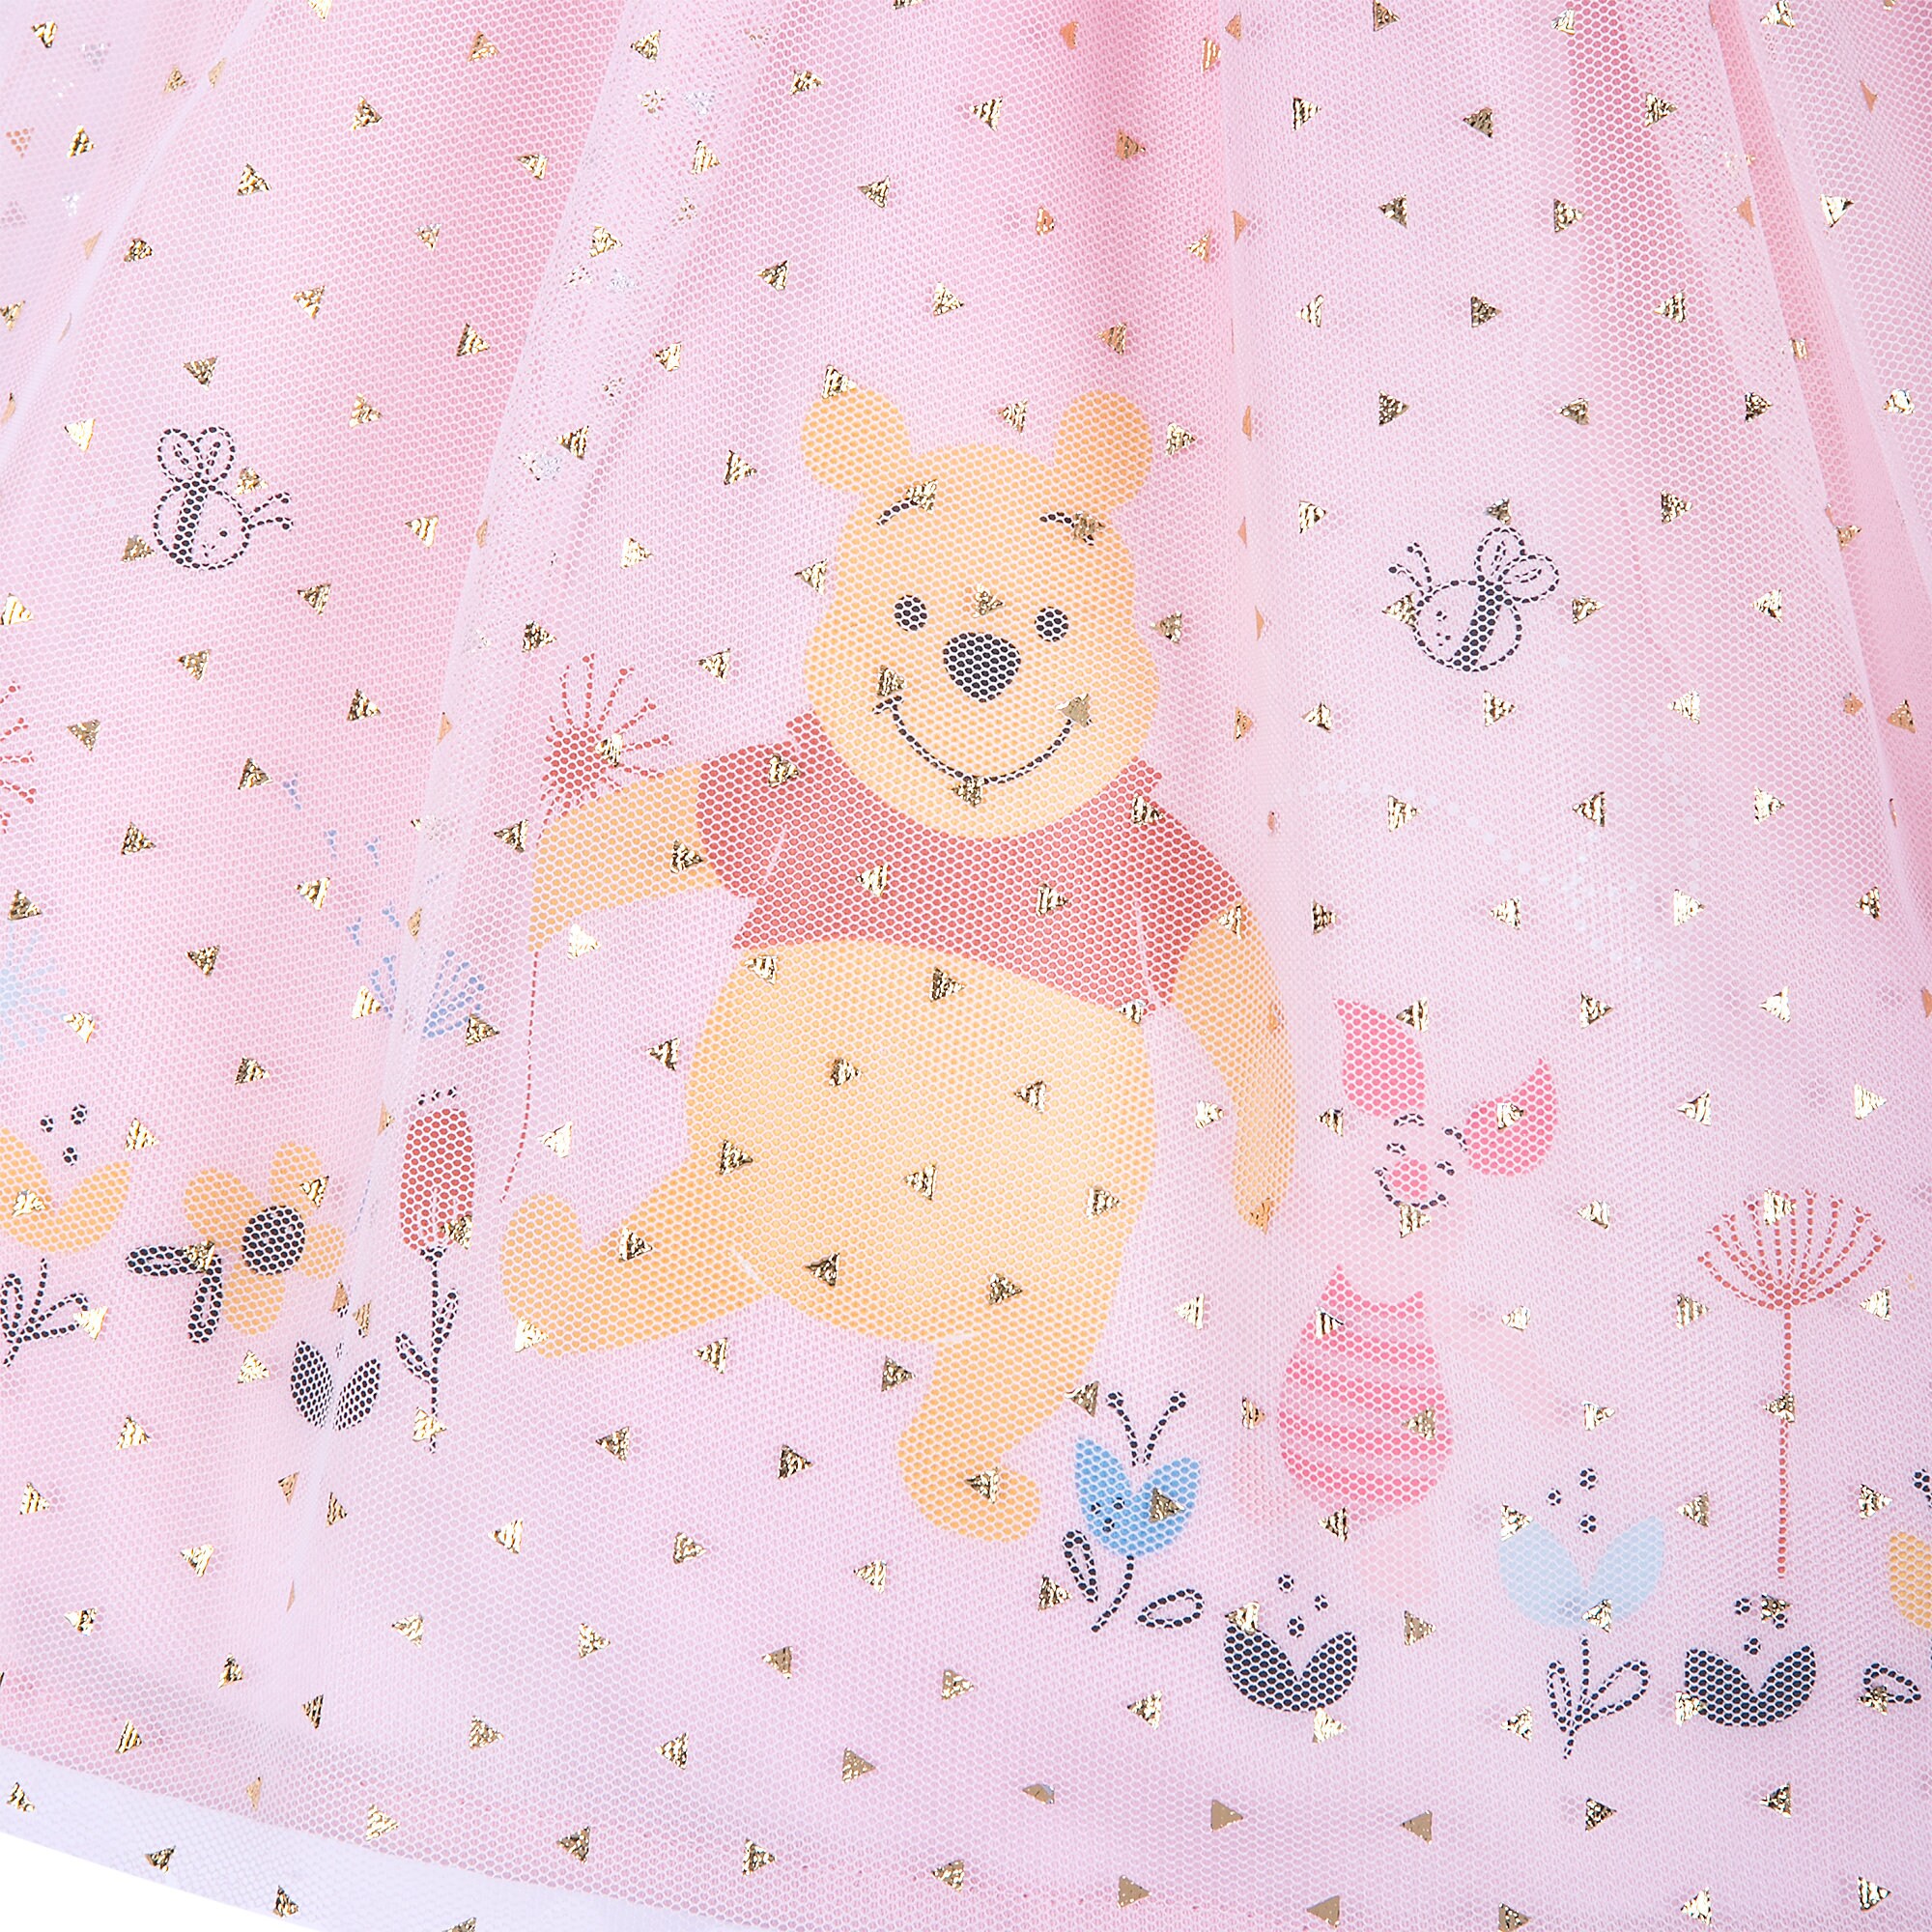 Winnie the Pooh Dress Set for Baby